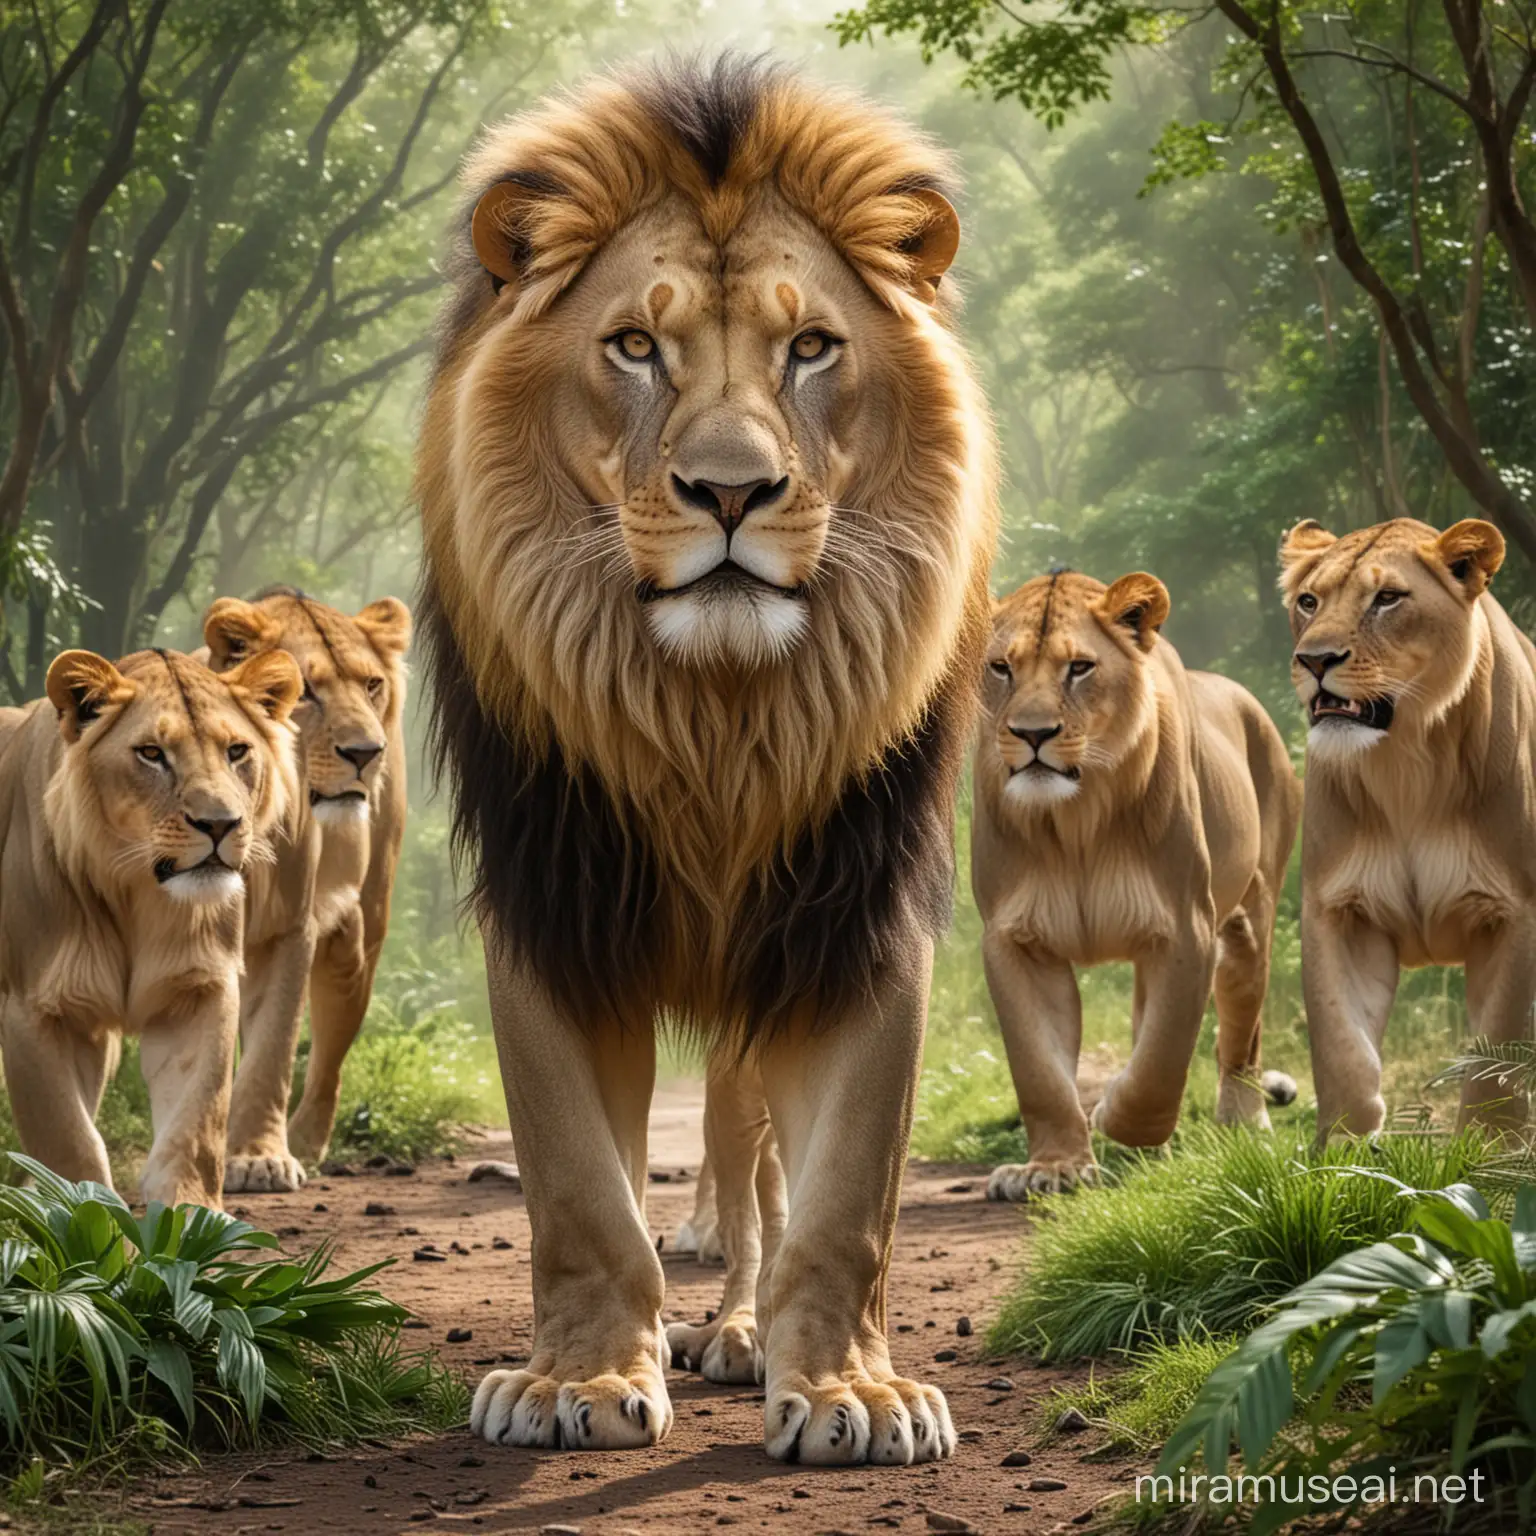 A picture of a huge lion commanding lions in a matured jungle